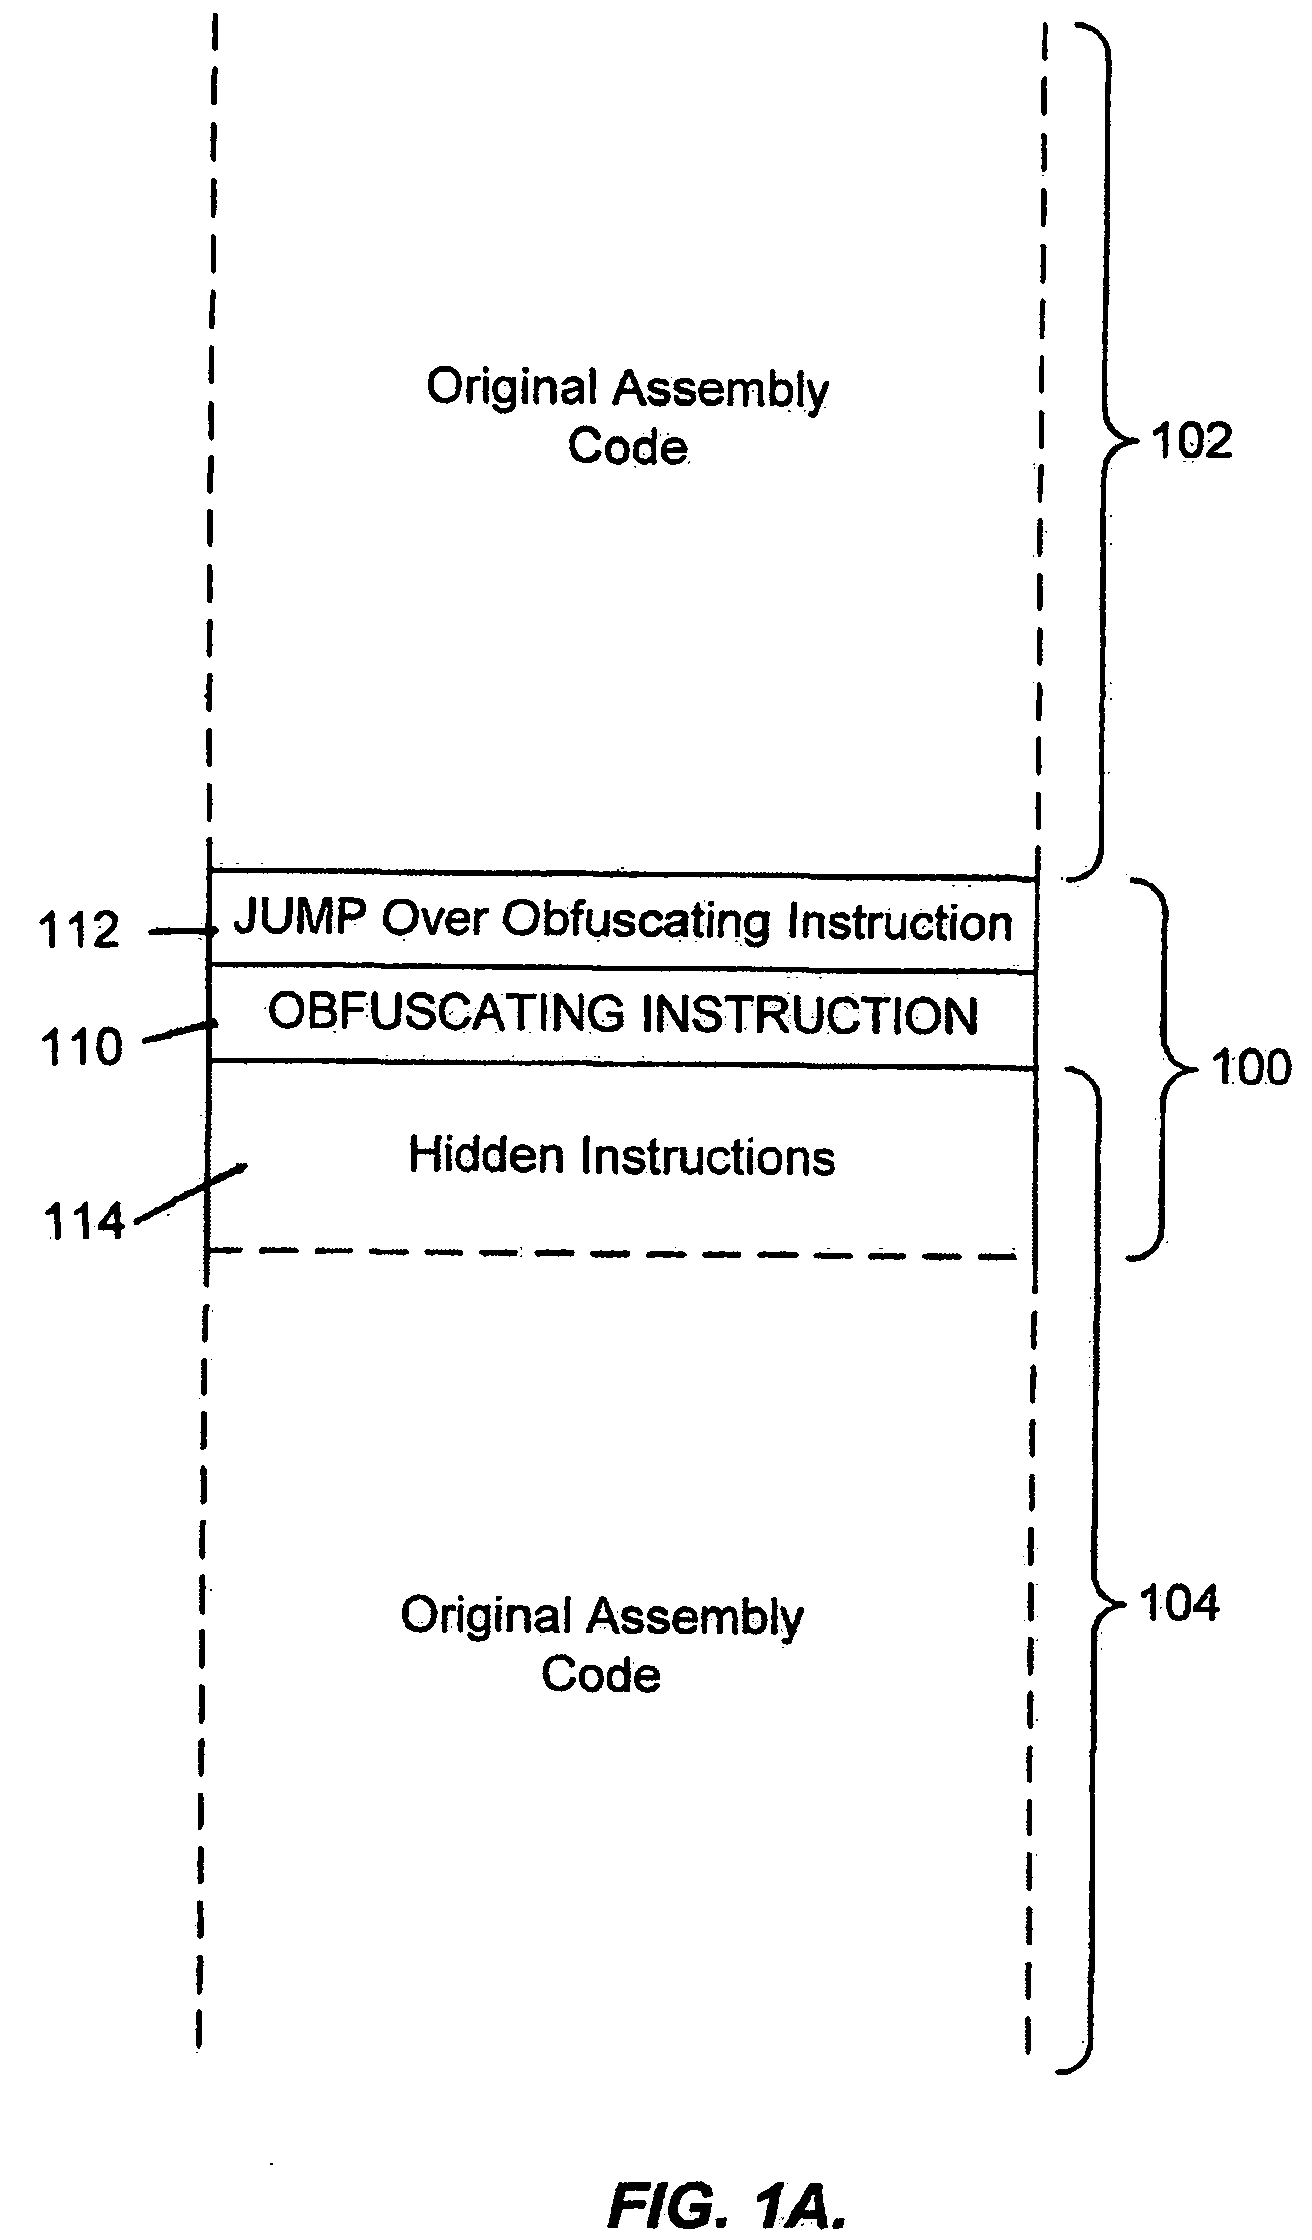 System for obfuscating computer code upon disassembly